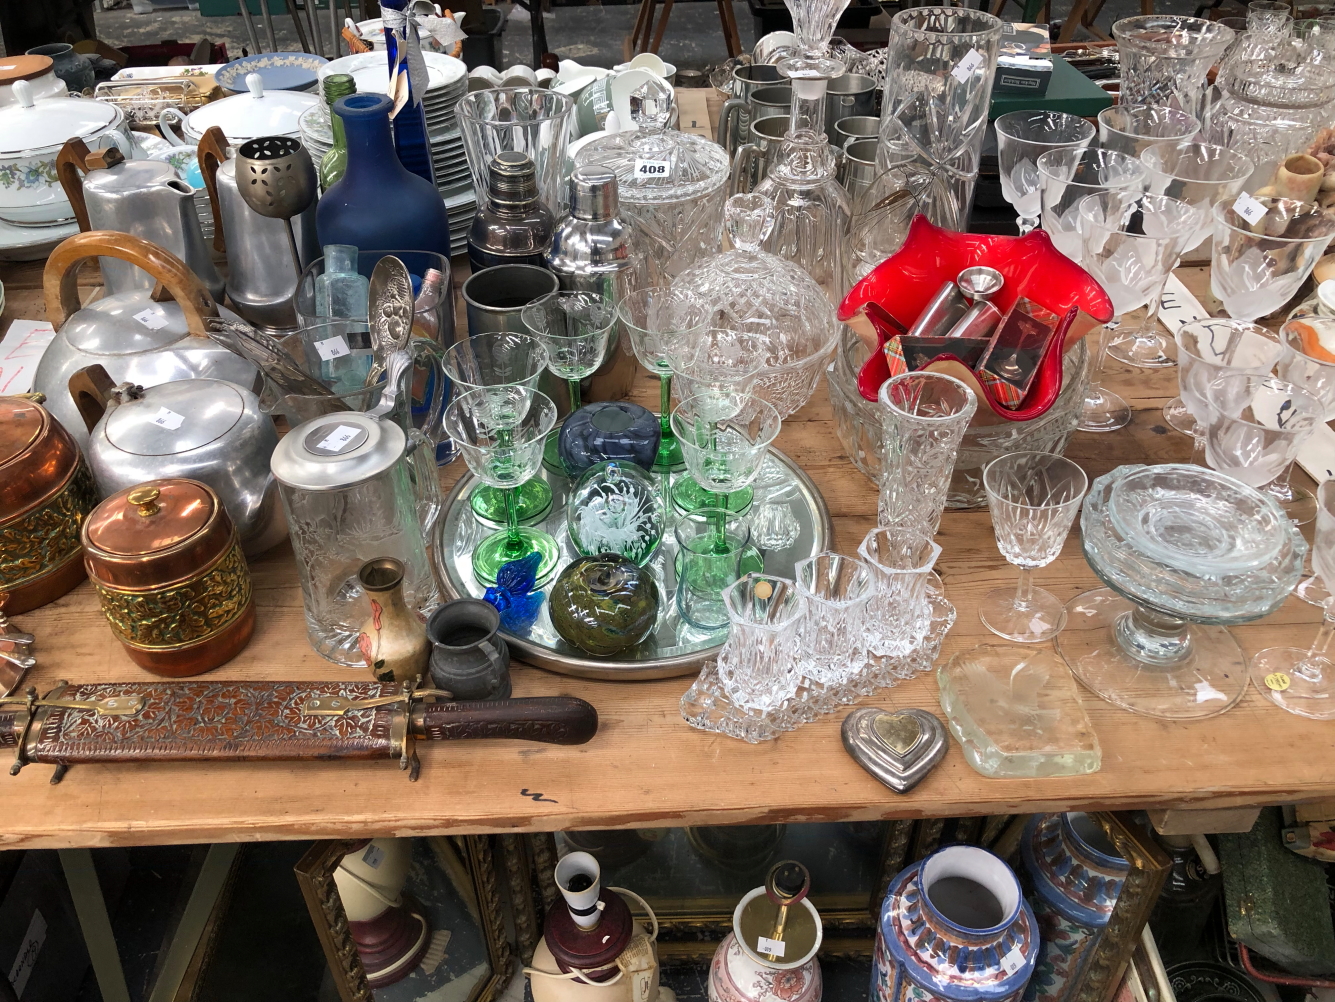 DRINKING GLASS, A DECANTER, OTHER GLASS WARE, TWO COCKTAIL SHAKERS, A PICQUOT WARE 4 PIECE TEA AND